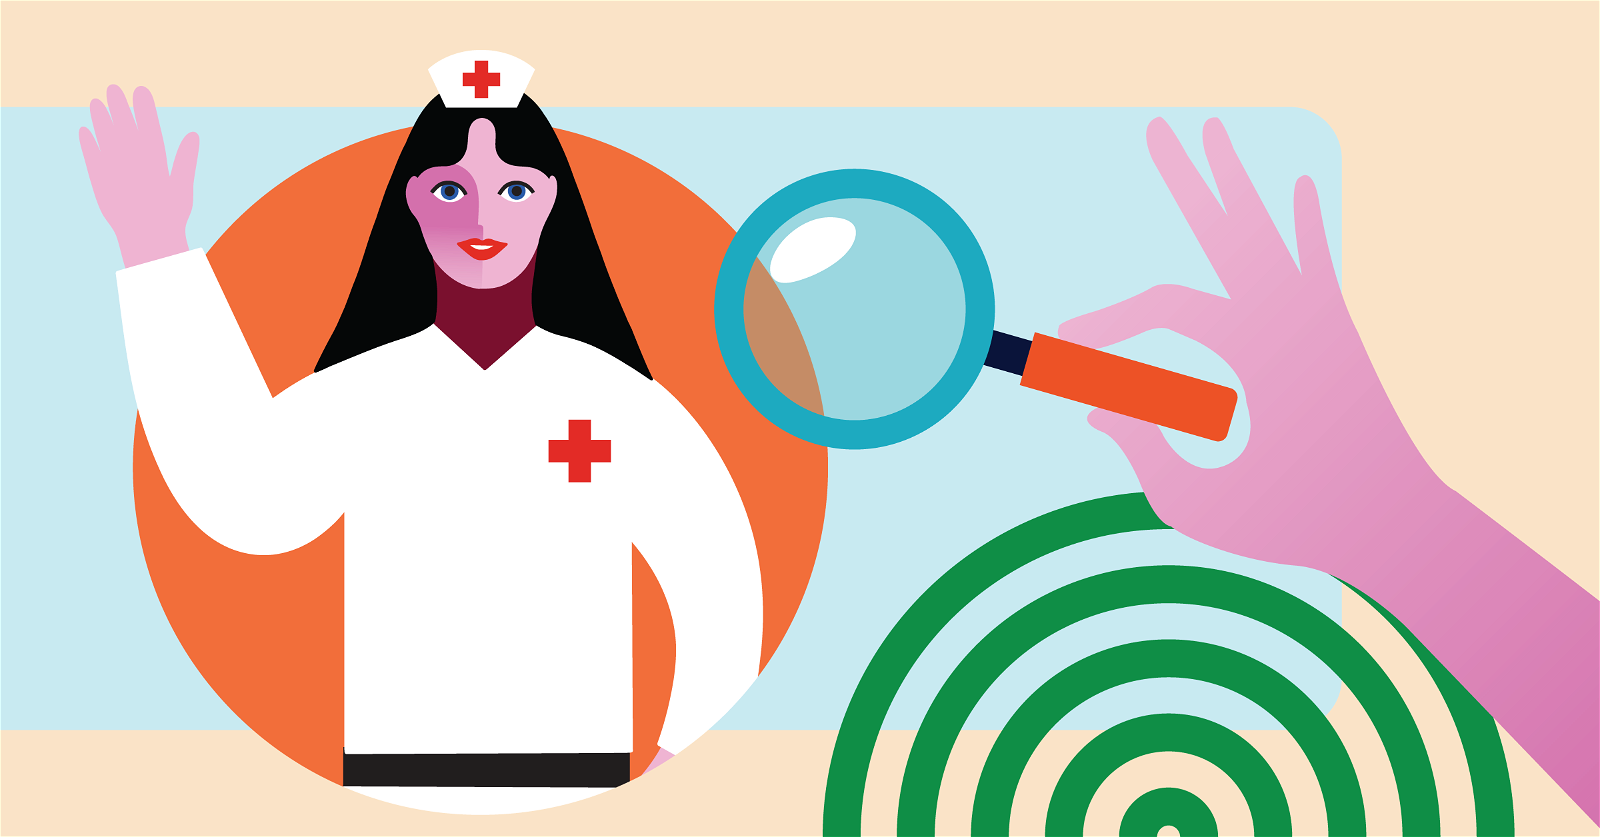 Illustration of a nurse with a red cross on her uniform raising a hand, adjacent to a magnifying glass held by another hand and a green target symbol.